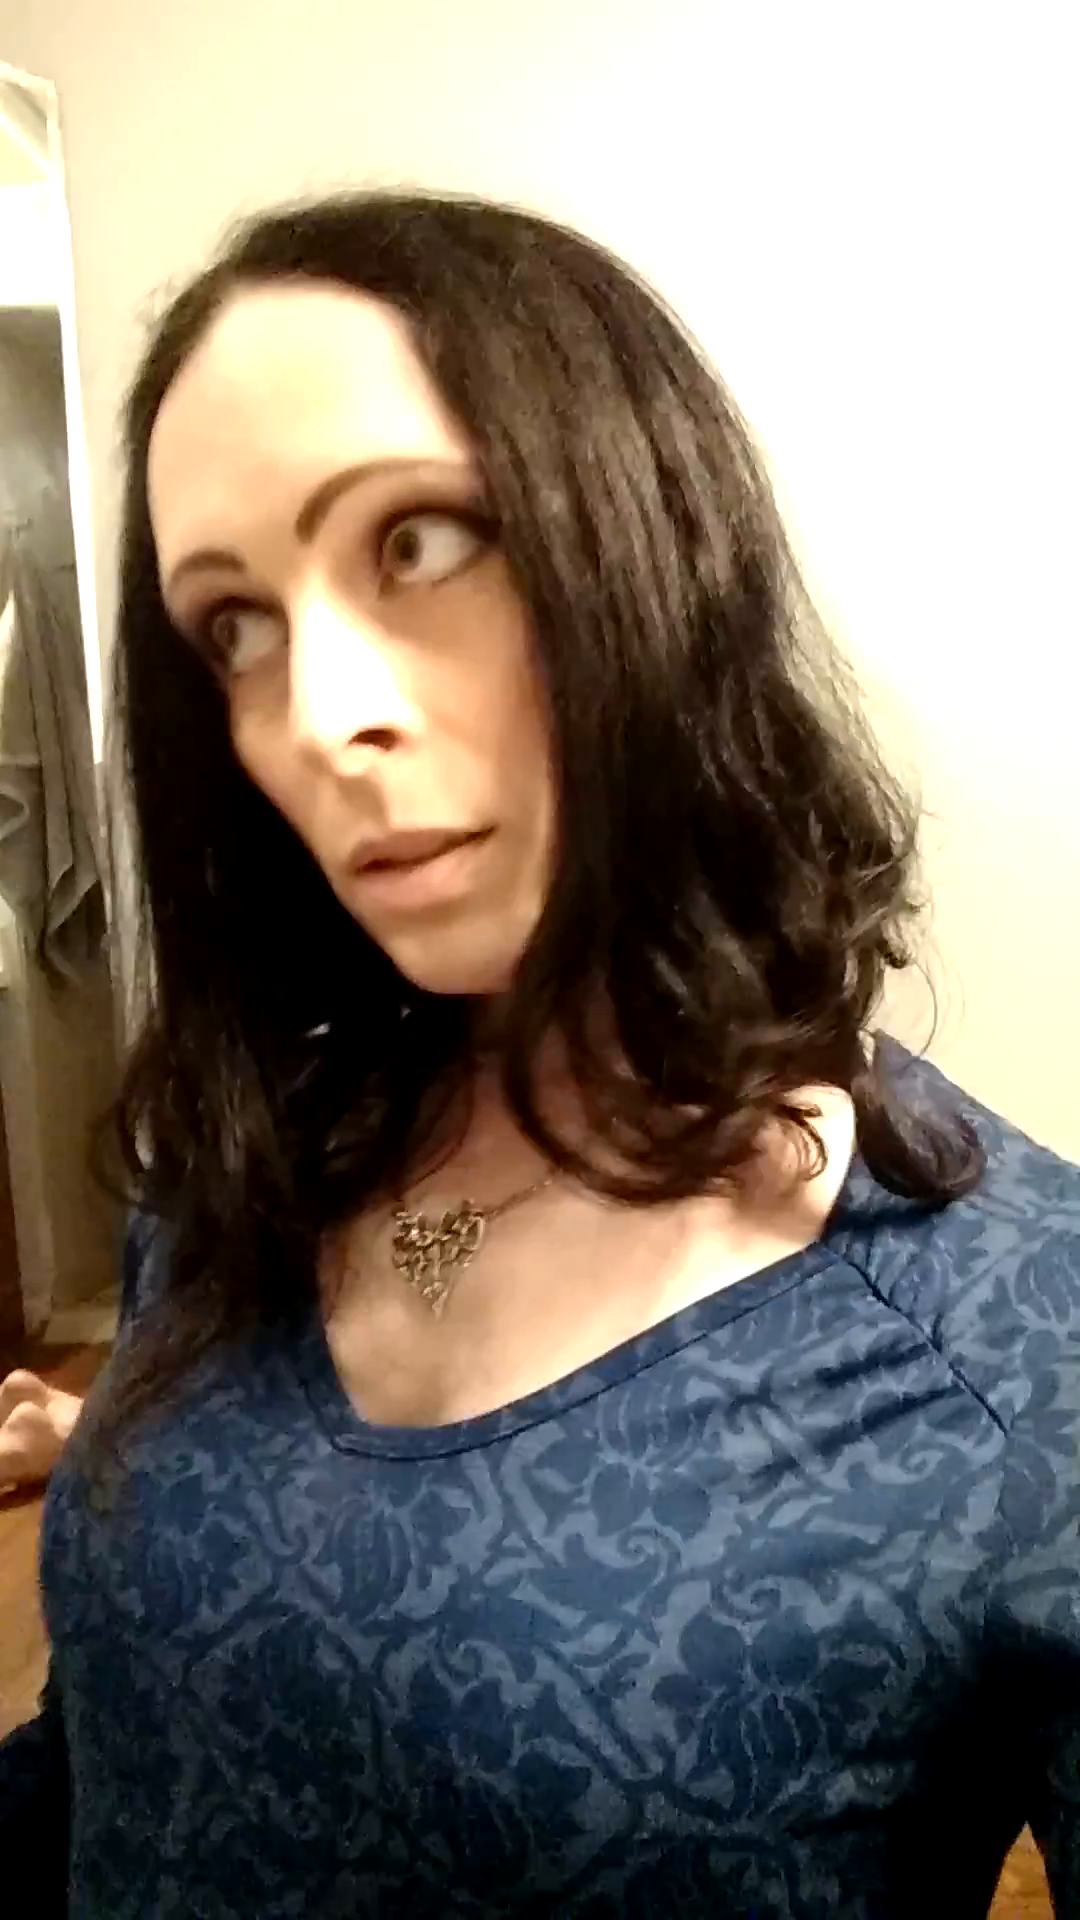 Watch the Video by LynnLandra with the username @LynnLandra, who is a star user, posted on March 6, 2019. The post is about the topic GivePissAChance. and the text says 'Drinking my own piss to degrade myself'